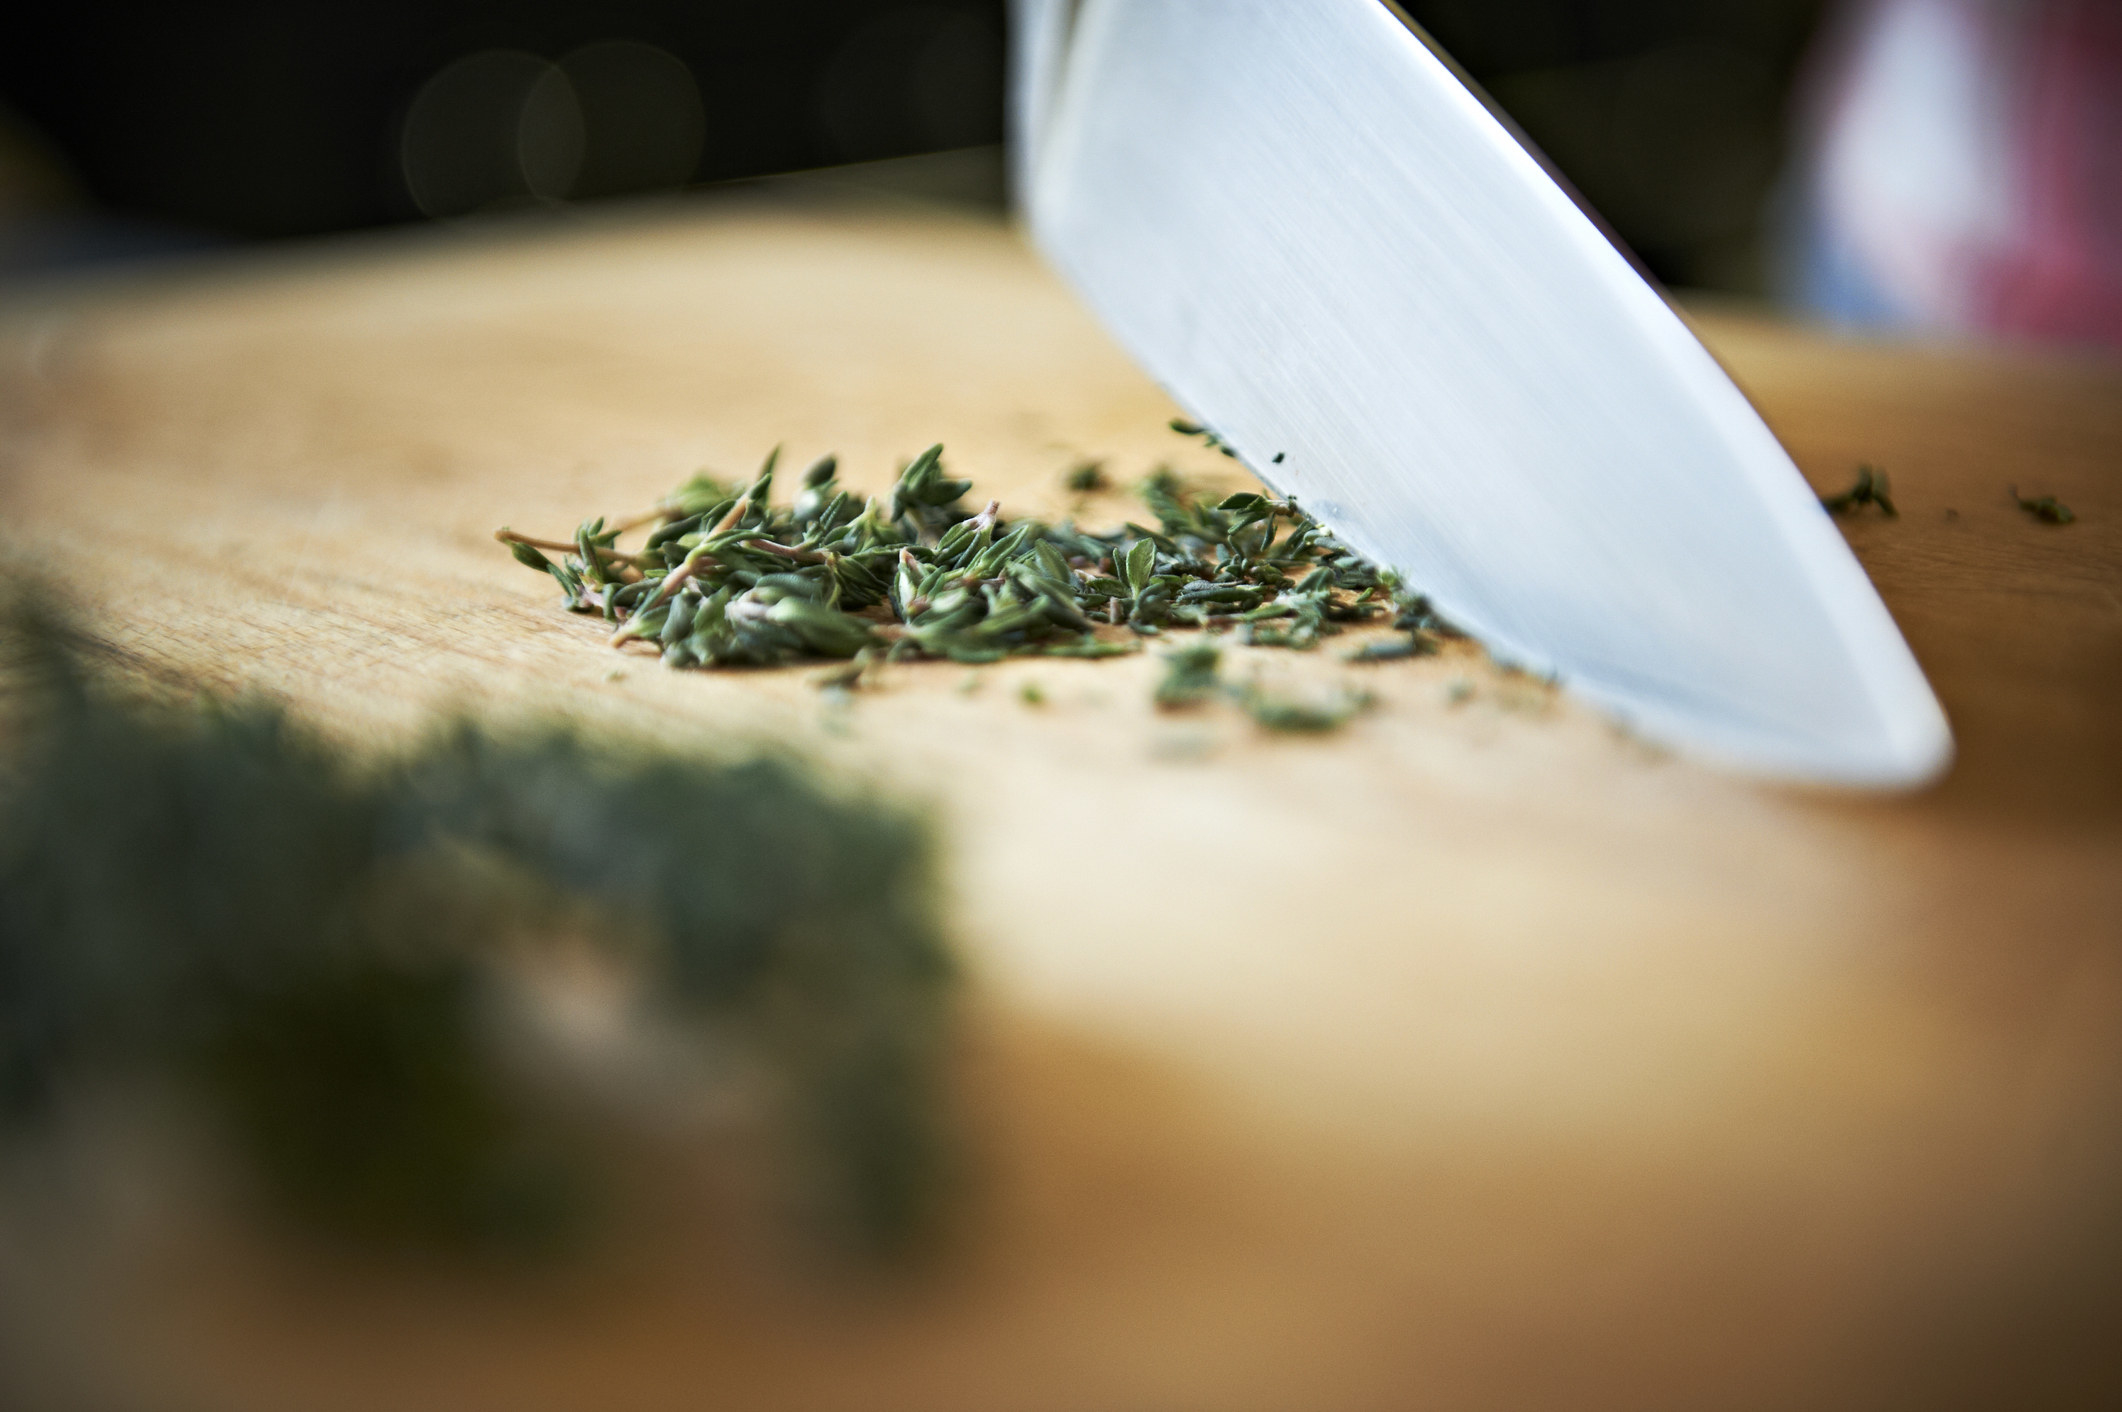 Thinly slicing herbs with a sharp knife.